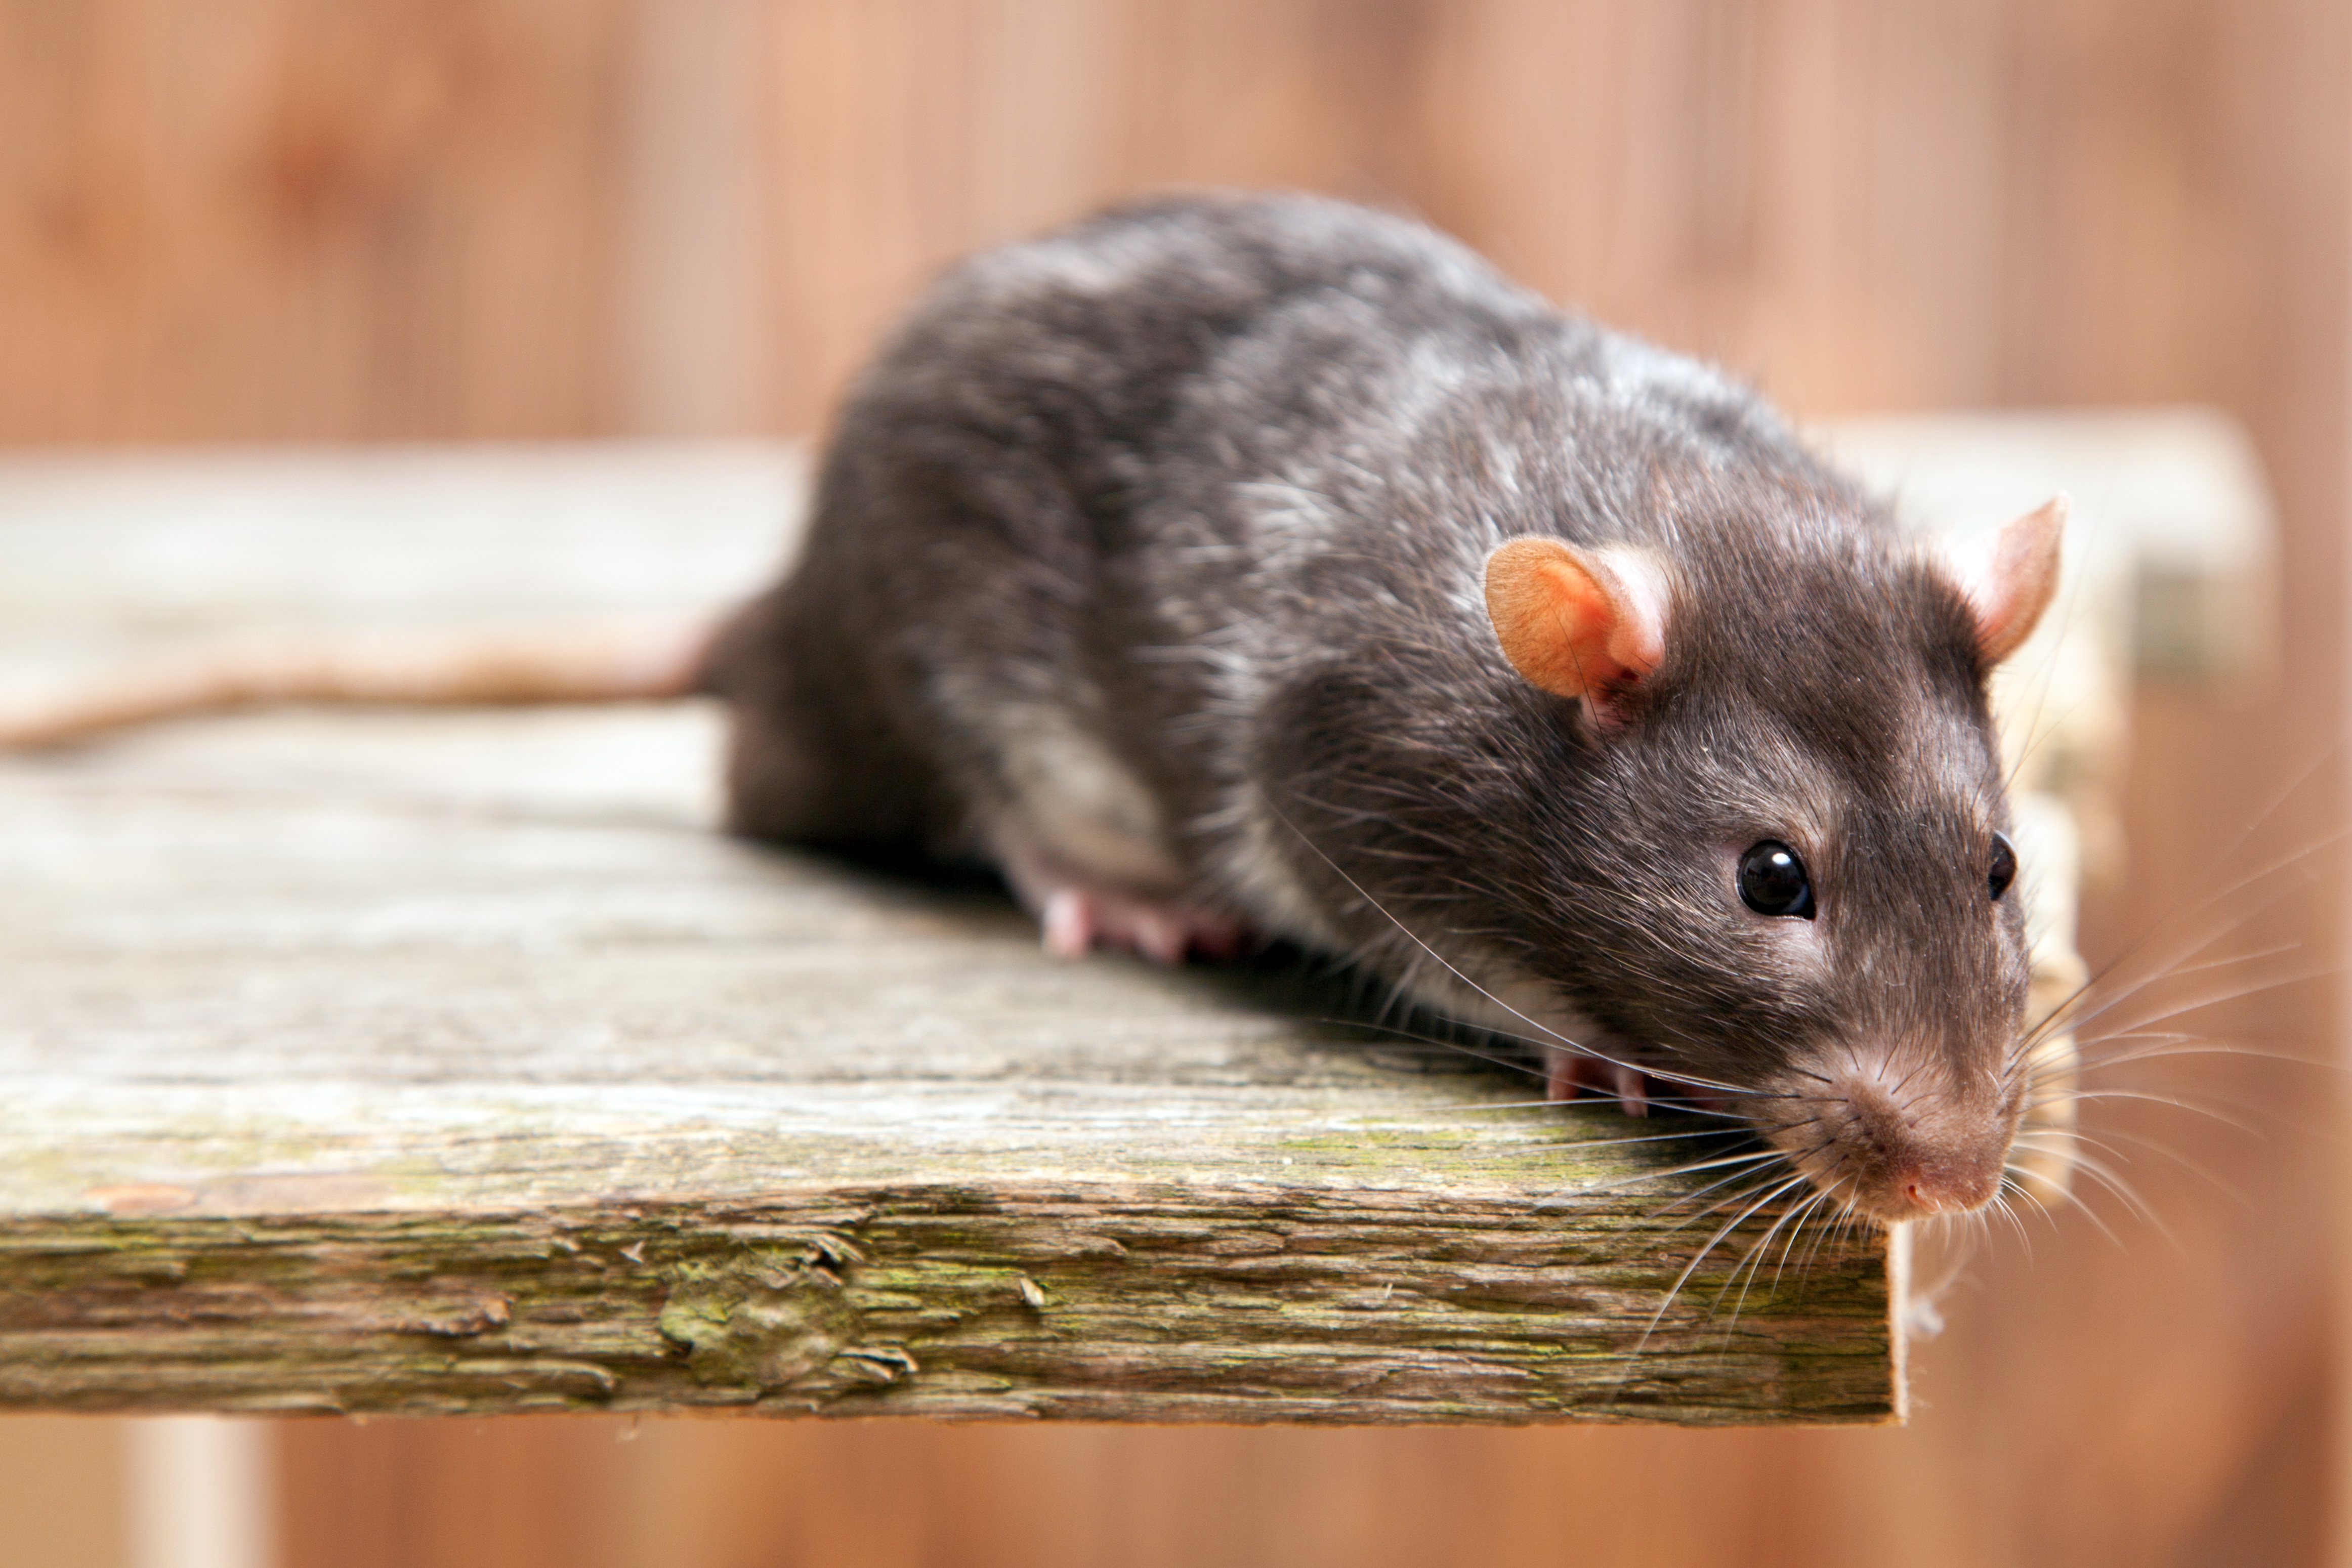 What Should You Do When You See a Rat?